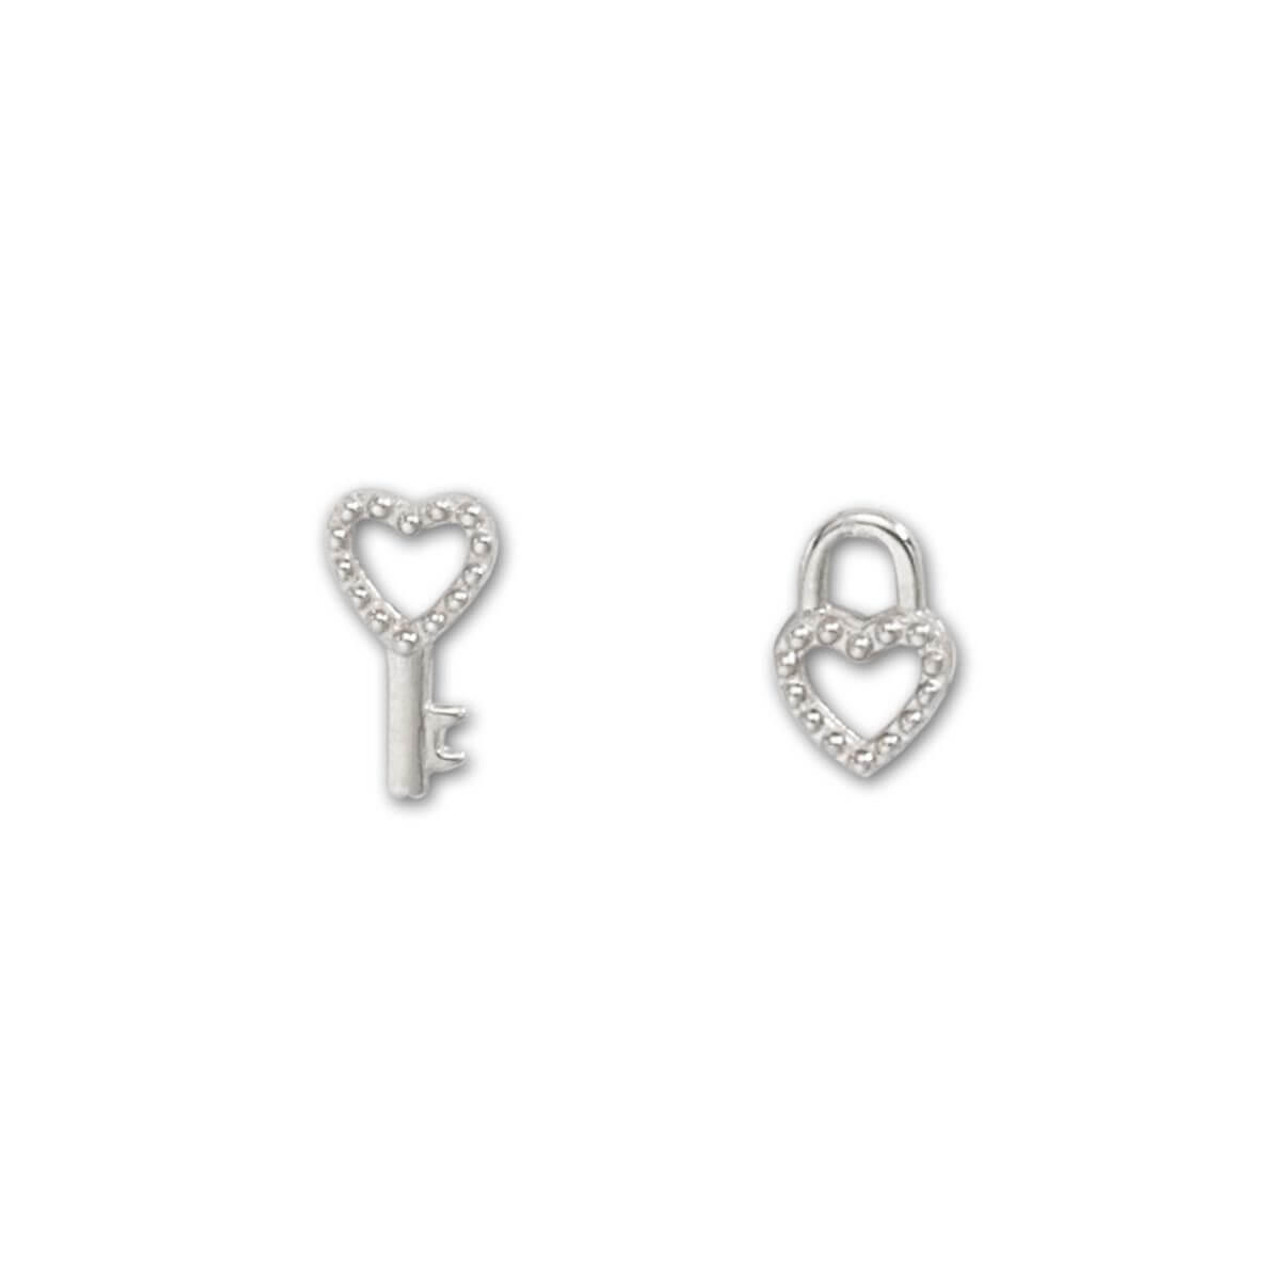 SYDNEY EVAN Small Pave Key Hole Lock Stud Earrings, 143561 - Touch of Class